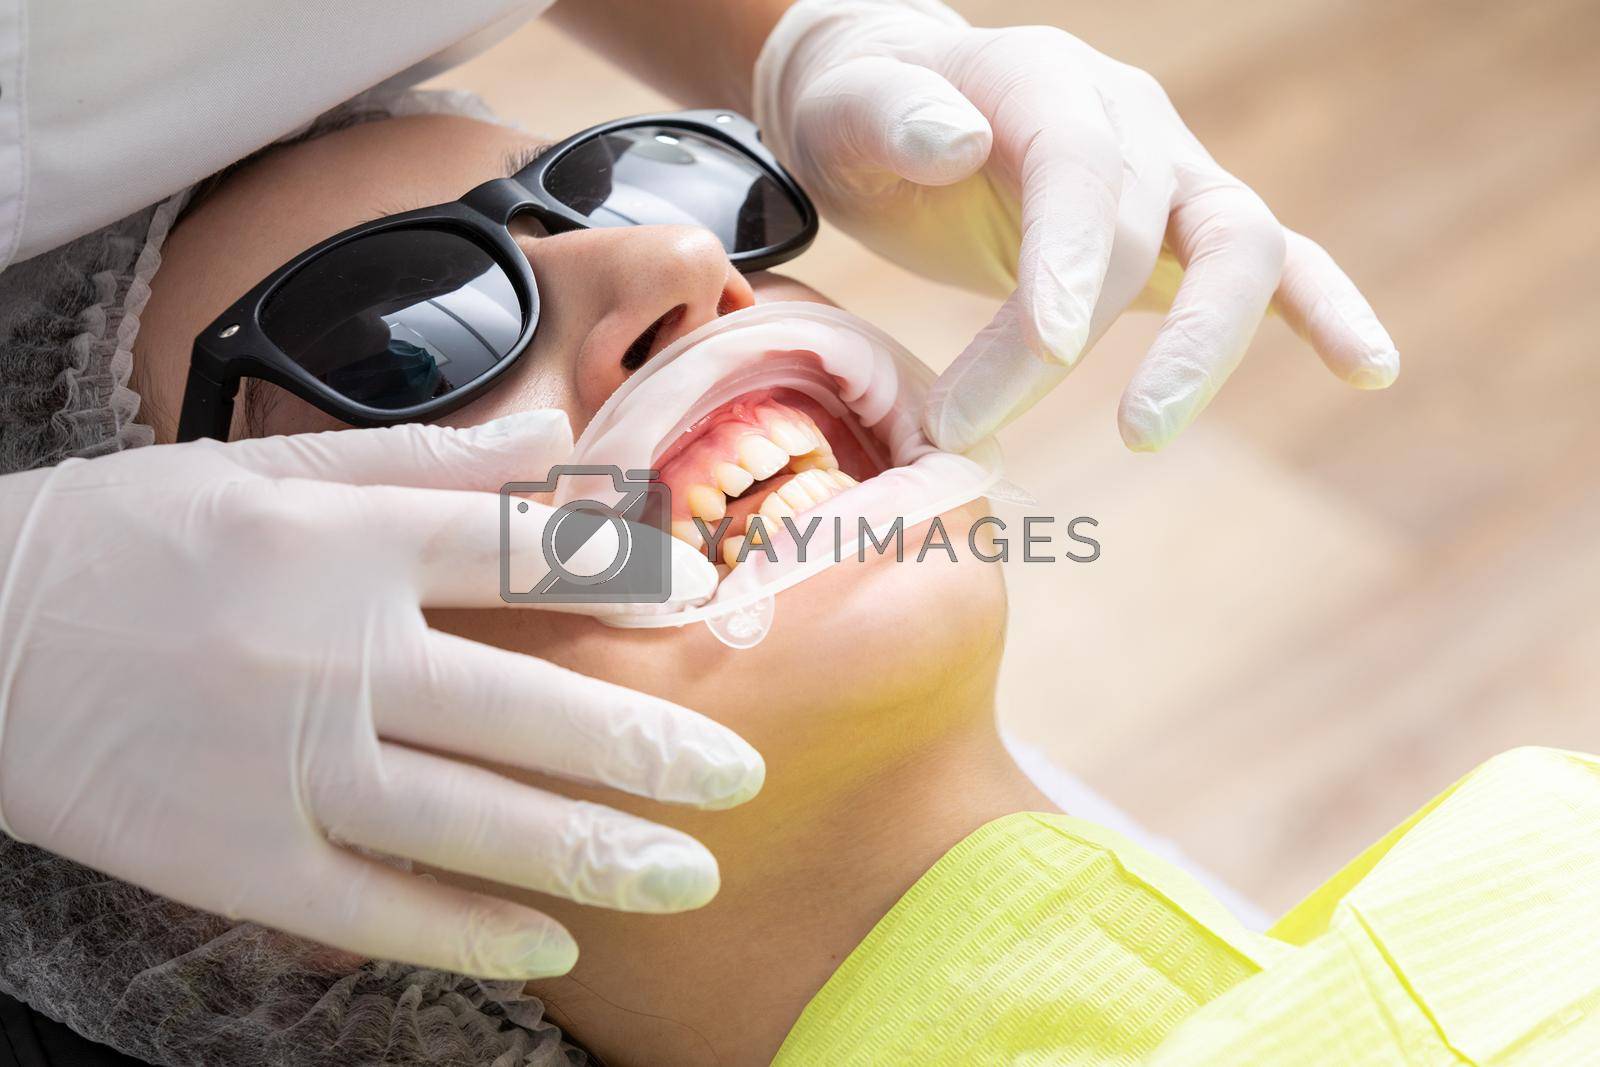 Royalty free image of Dentist installing a patient cheek retractor in dentist office by Mariakray